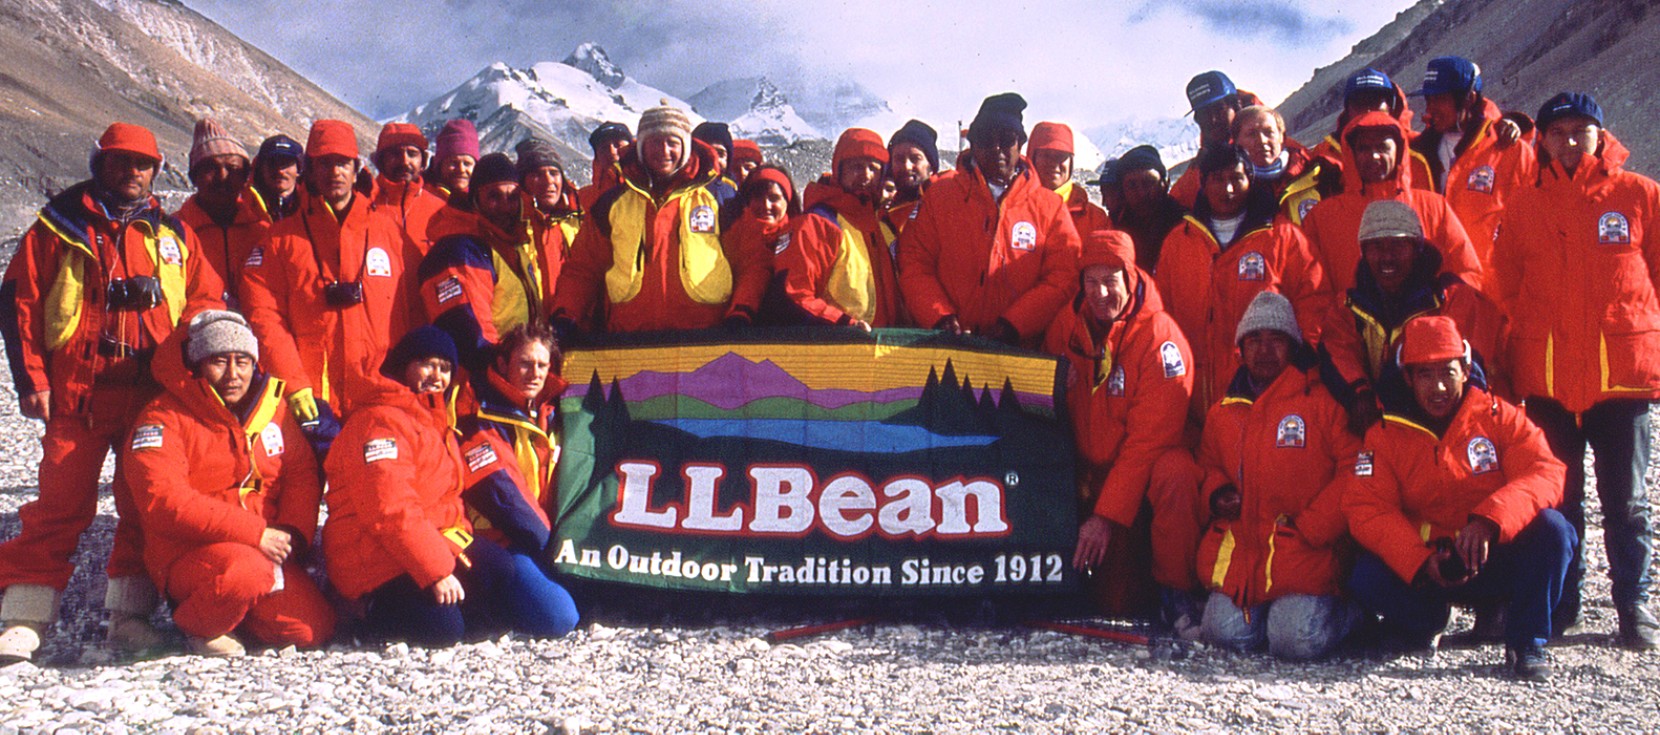 Members of the Everest Peace Climb hold an L.L.Bean flag.